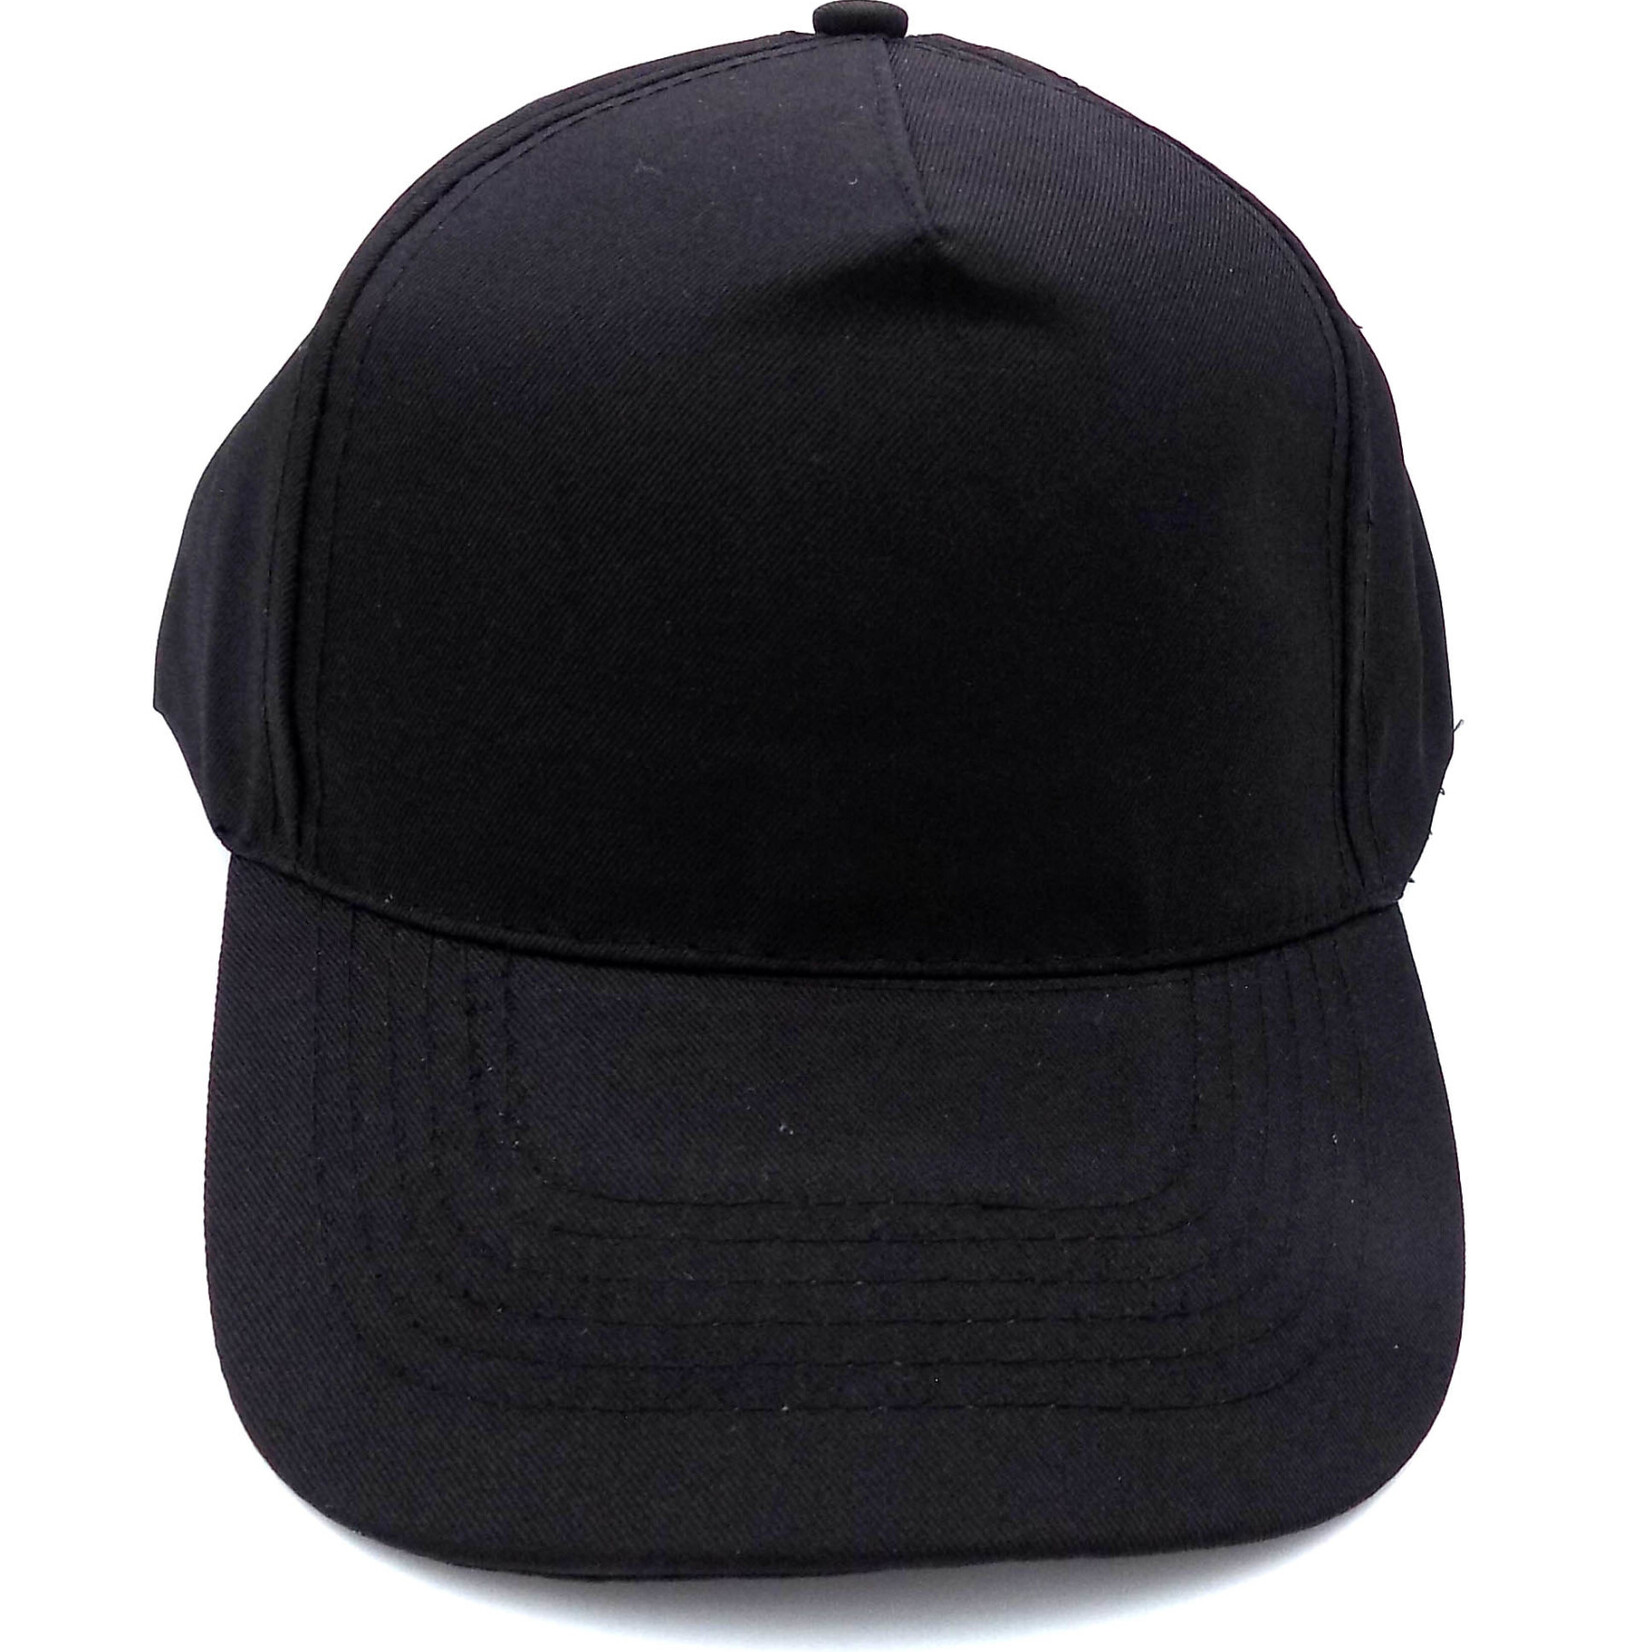 Caps with velcro closure 5 panel - Samaroo's Limited